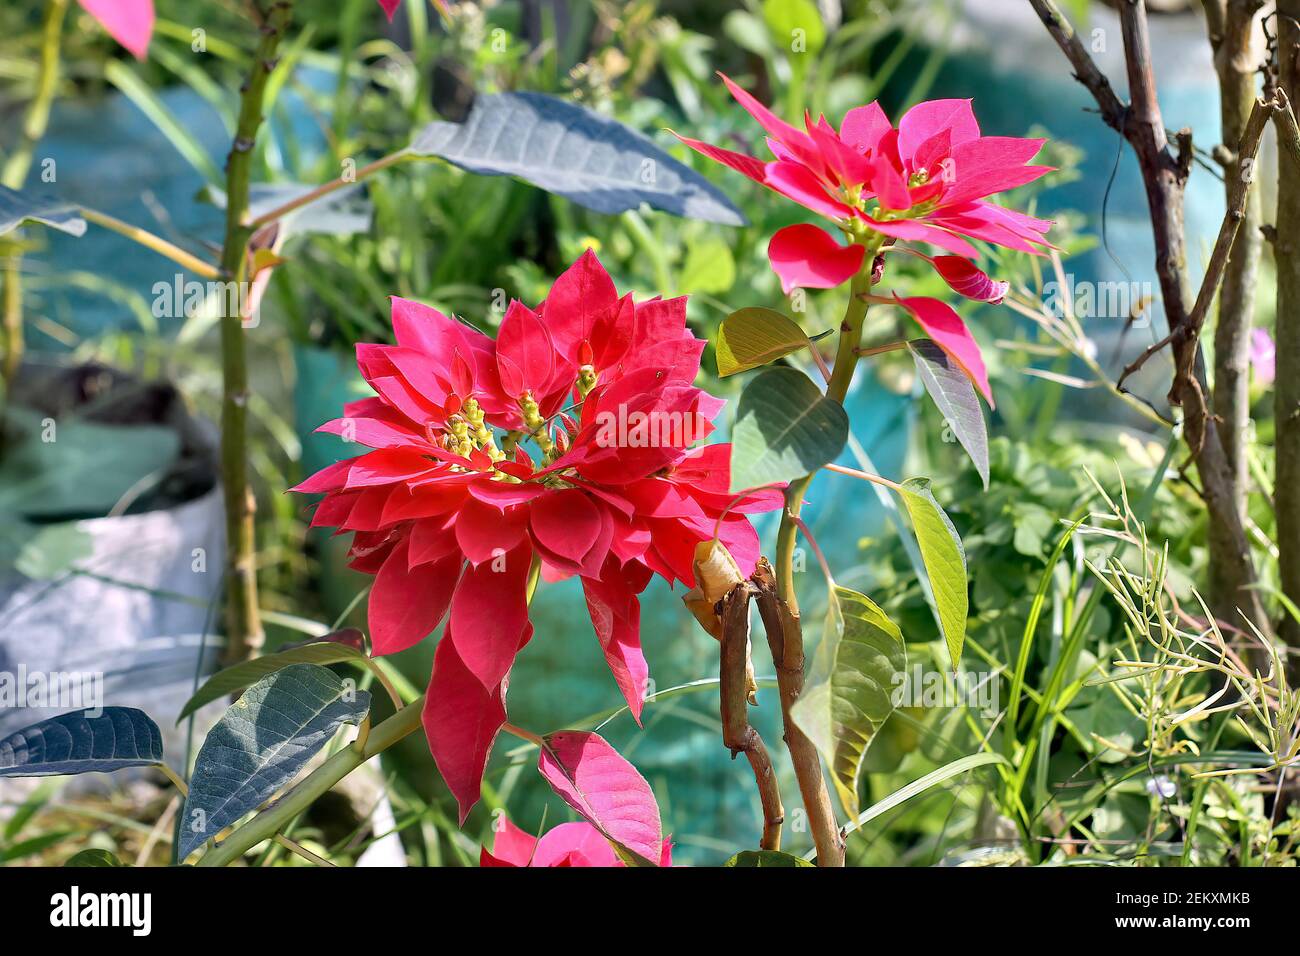 Selective focus shot of beautiful red poinsettia flowers in the garden Stock Photo